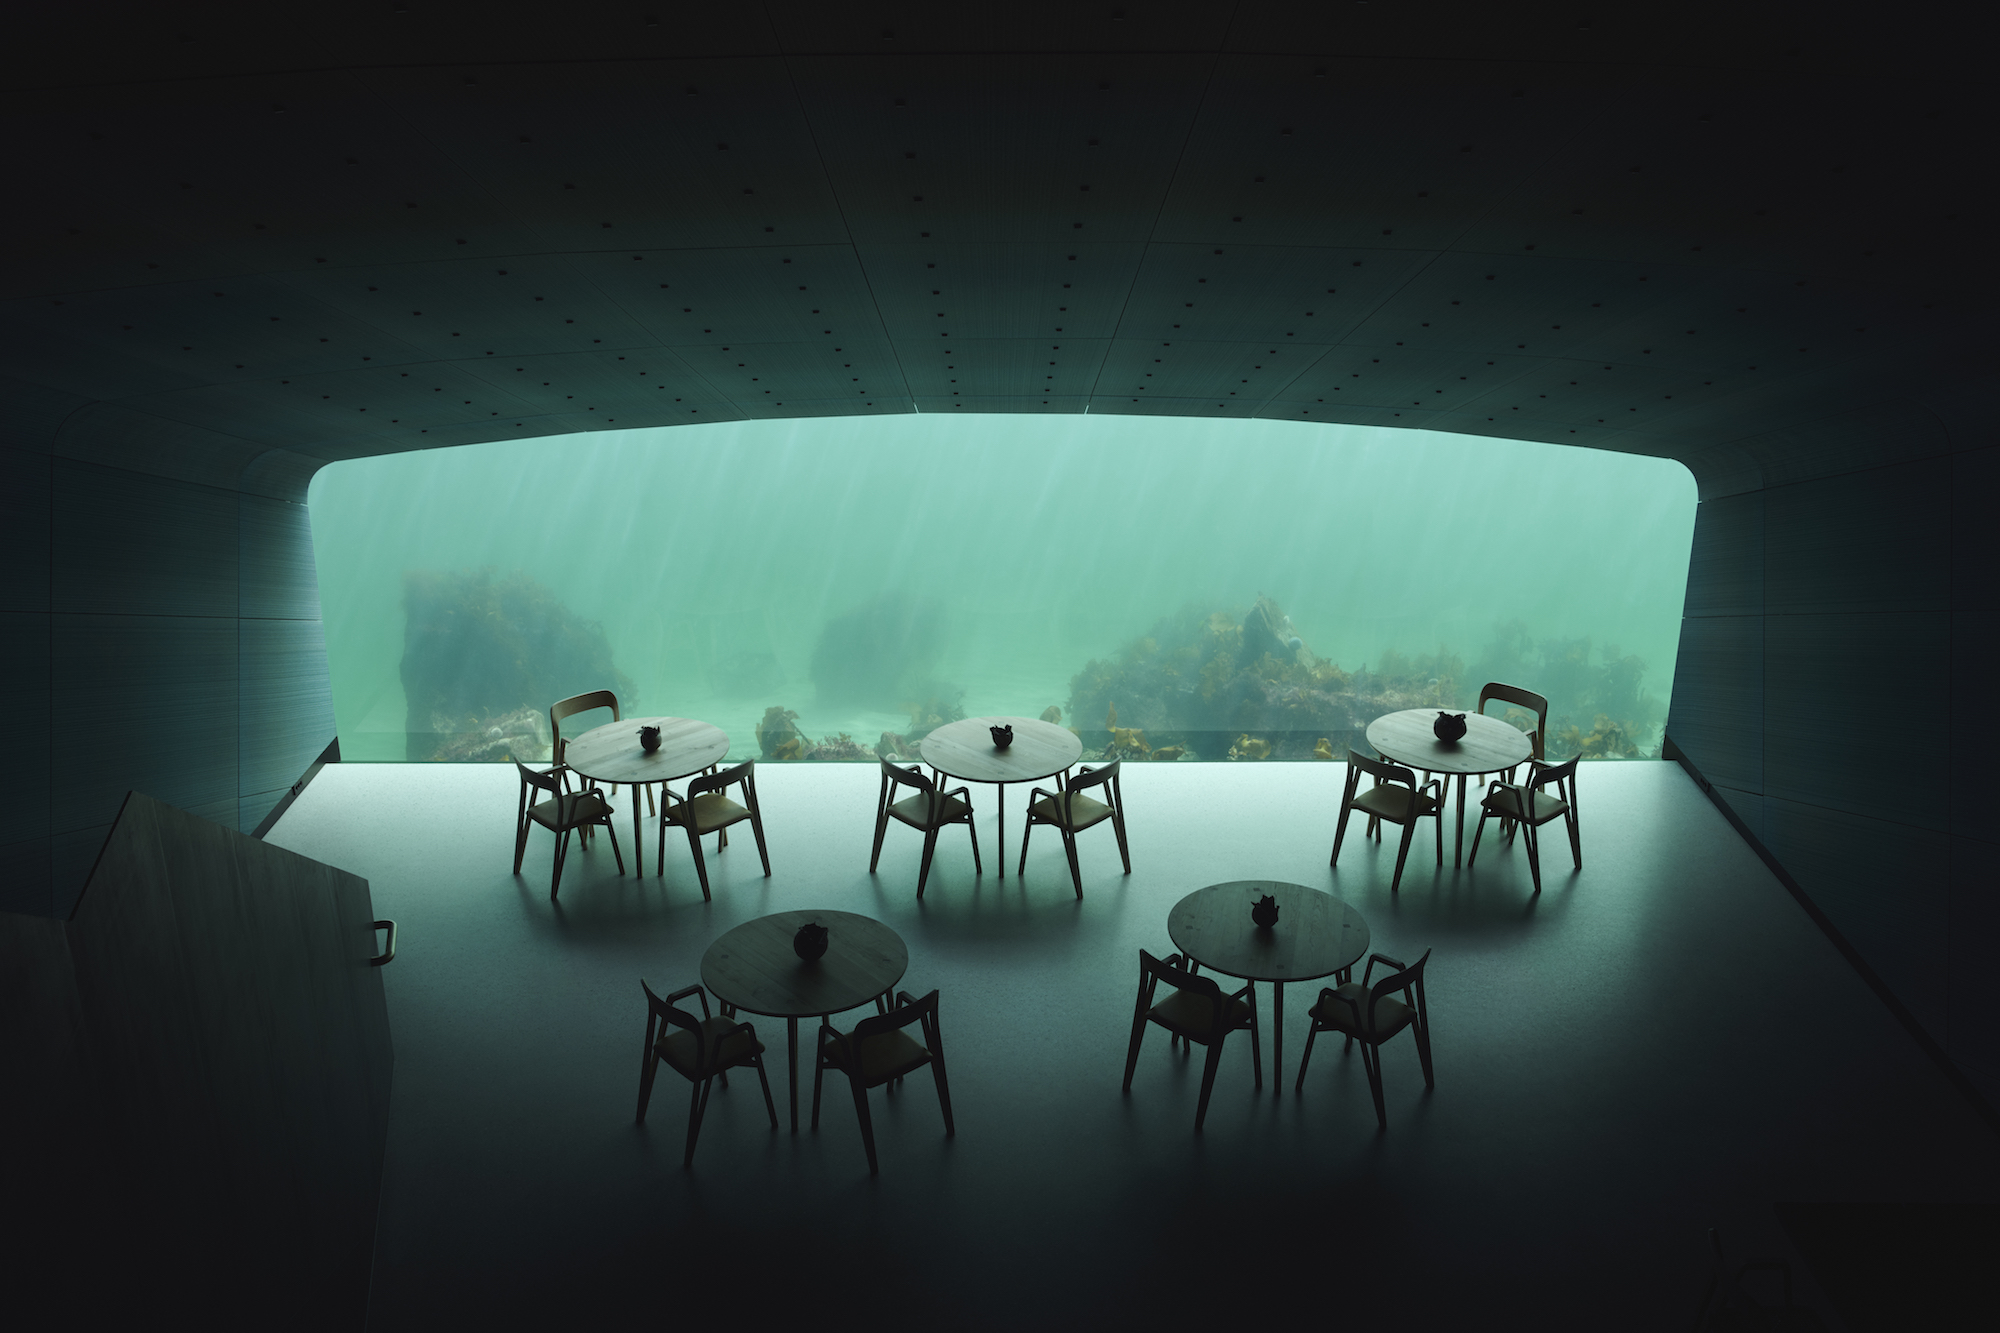 Under’s massive dining room window offers a view of the seabed as it changes throughout seasons and varying weather conditions.